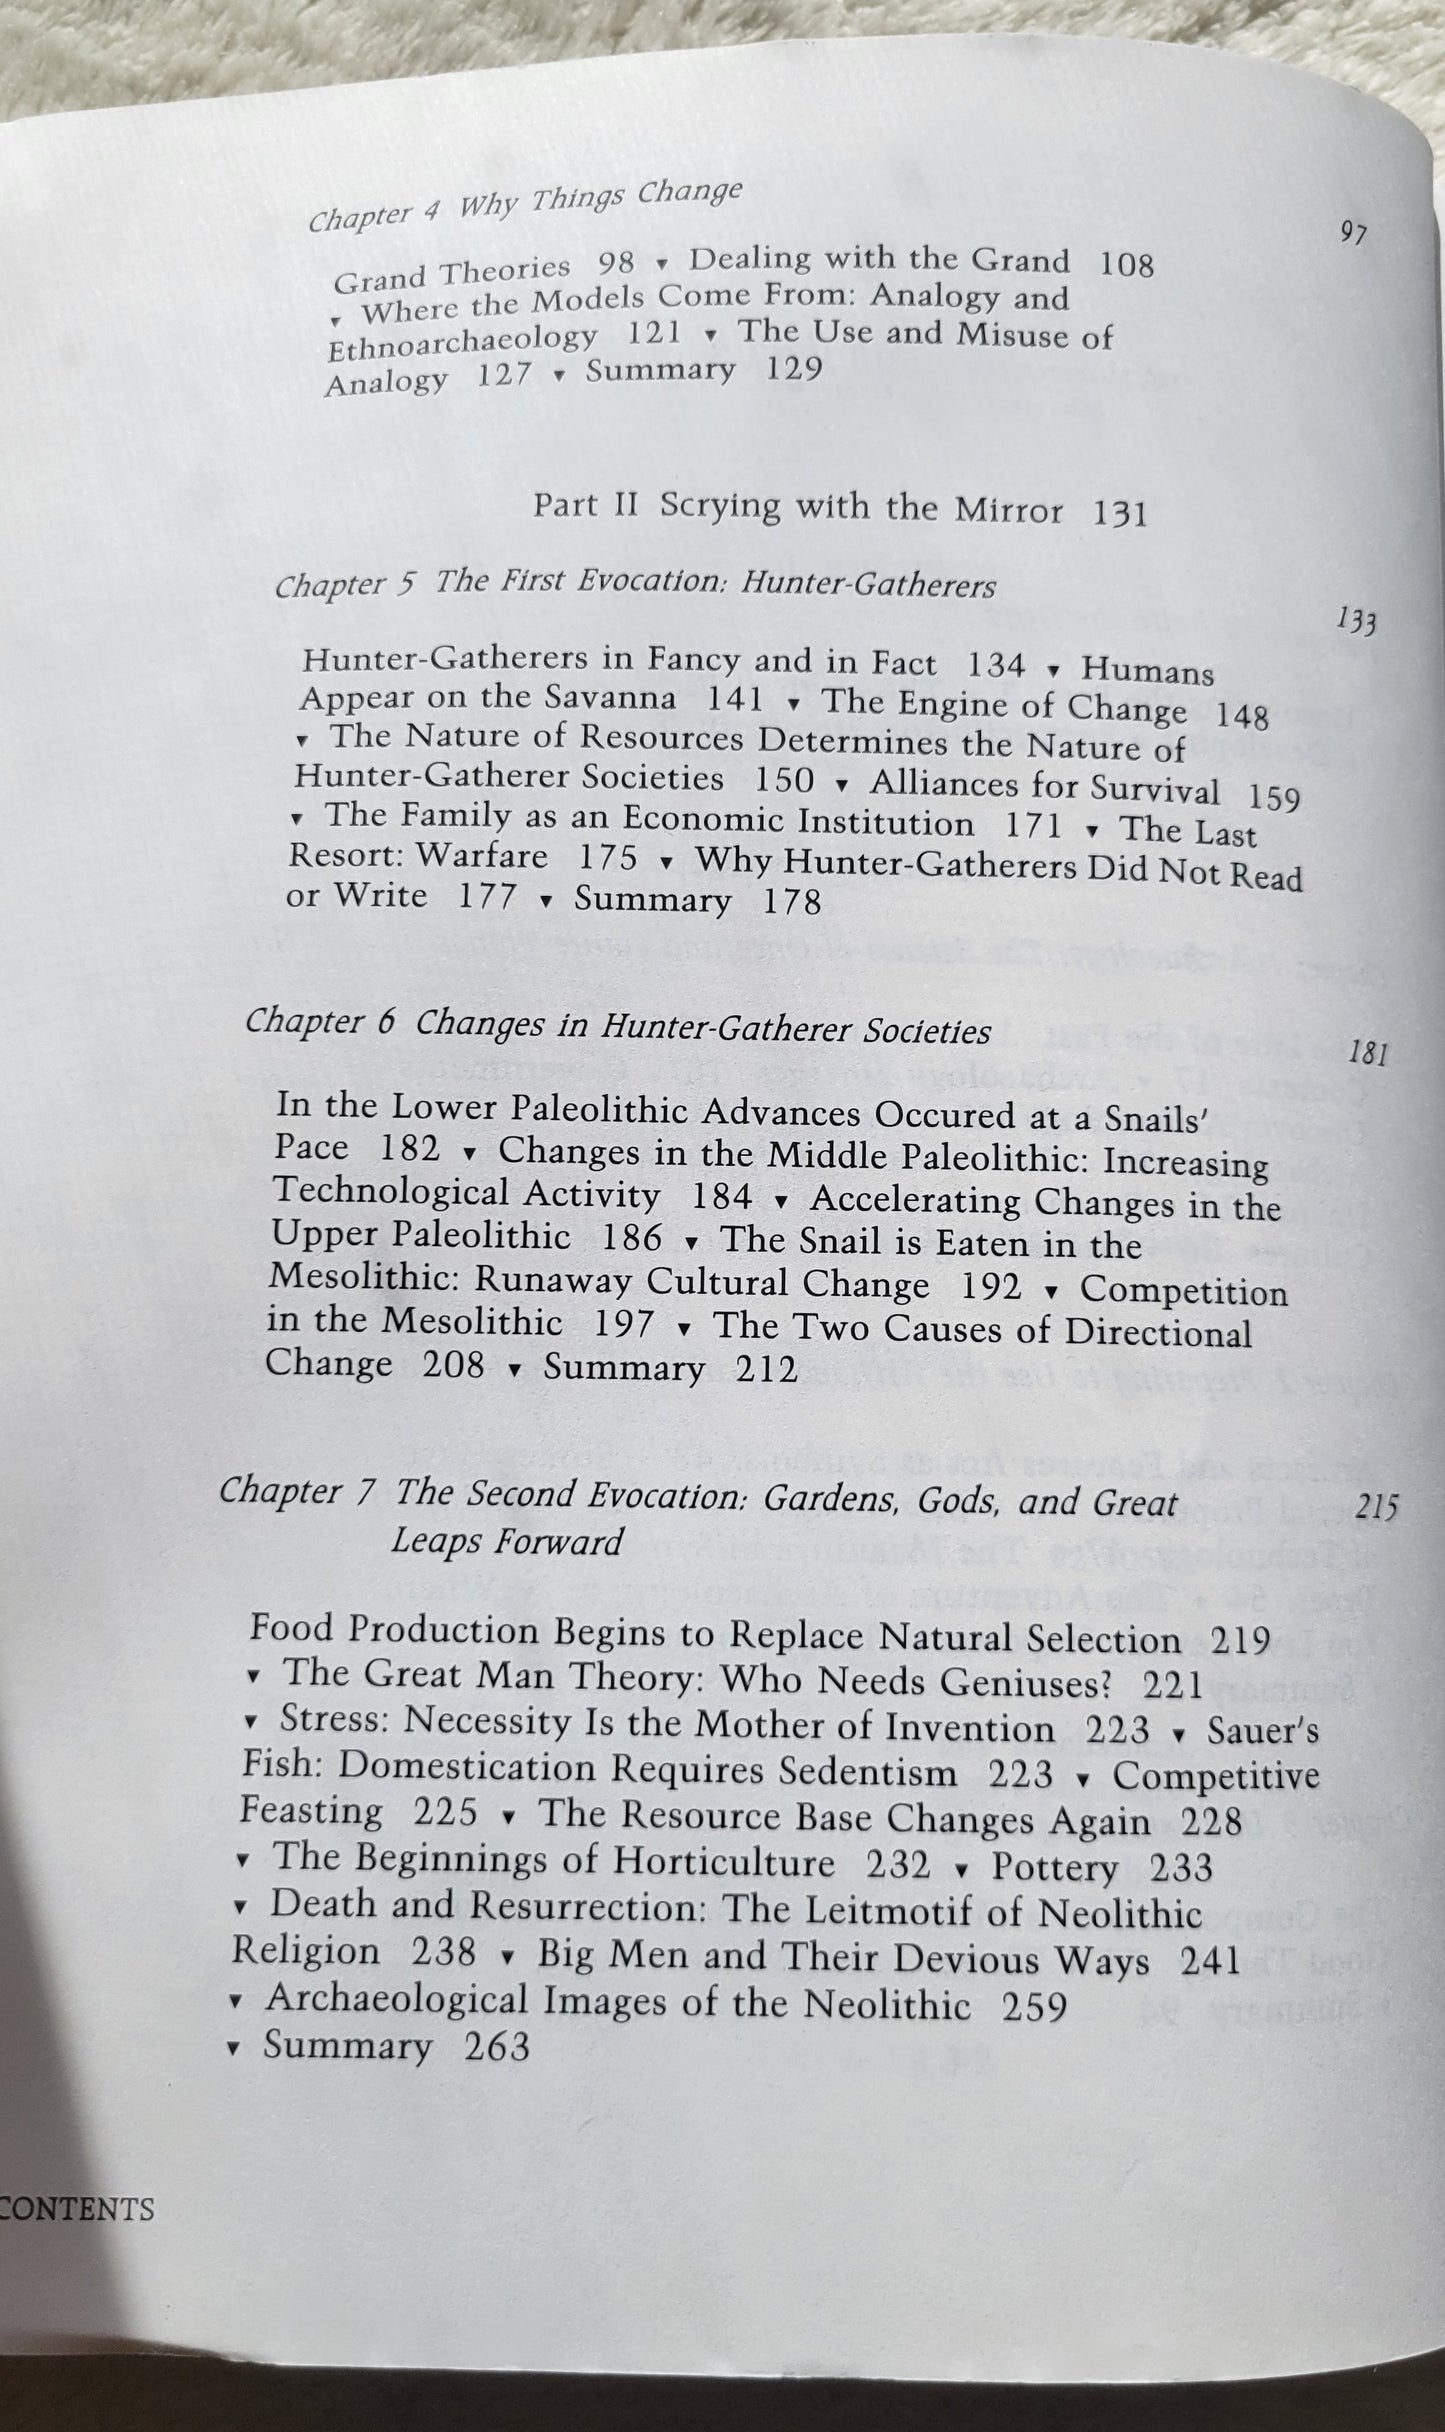 "Archaeology: The Science of Once and Future Things" by Brian Hayden, W. H. Freeman and Company, 1993. "Archaeology: The Science of Once and Future Things shows how objects recovered from the earth are used to reconstruct past societies and interpret the major events in the long space of human culture. It is concise and richly information introduction to the archaeologist's basic concepts, methods, and tools."  View of table of contents.